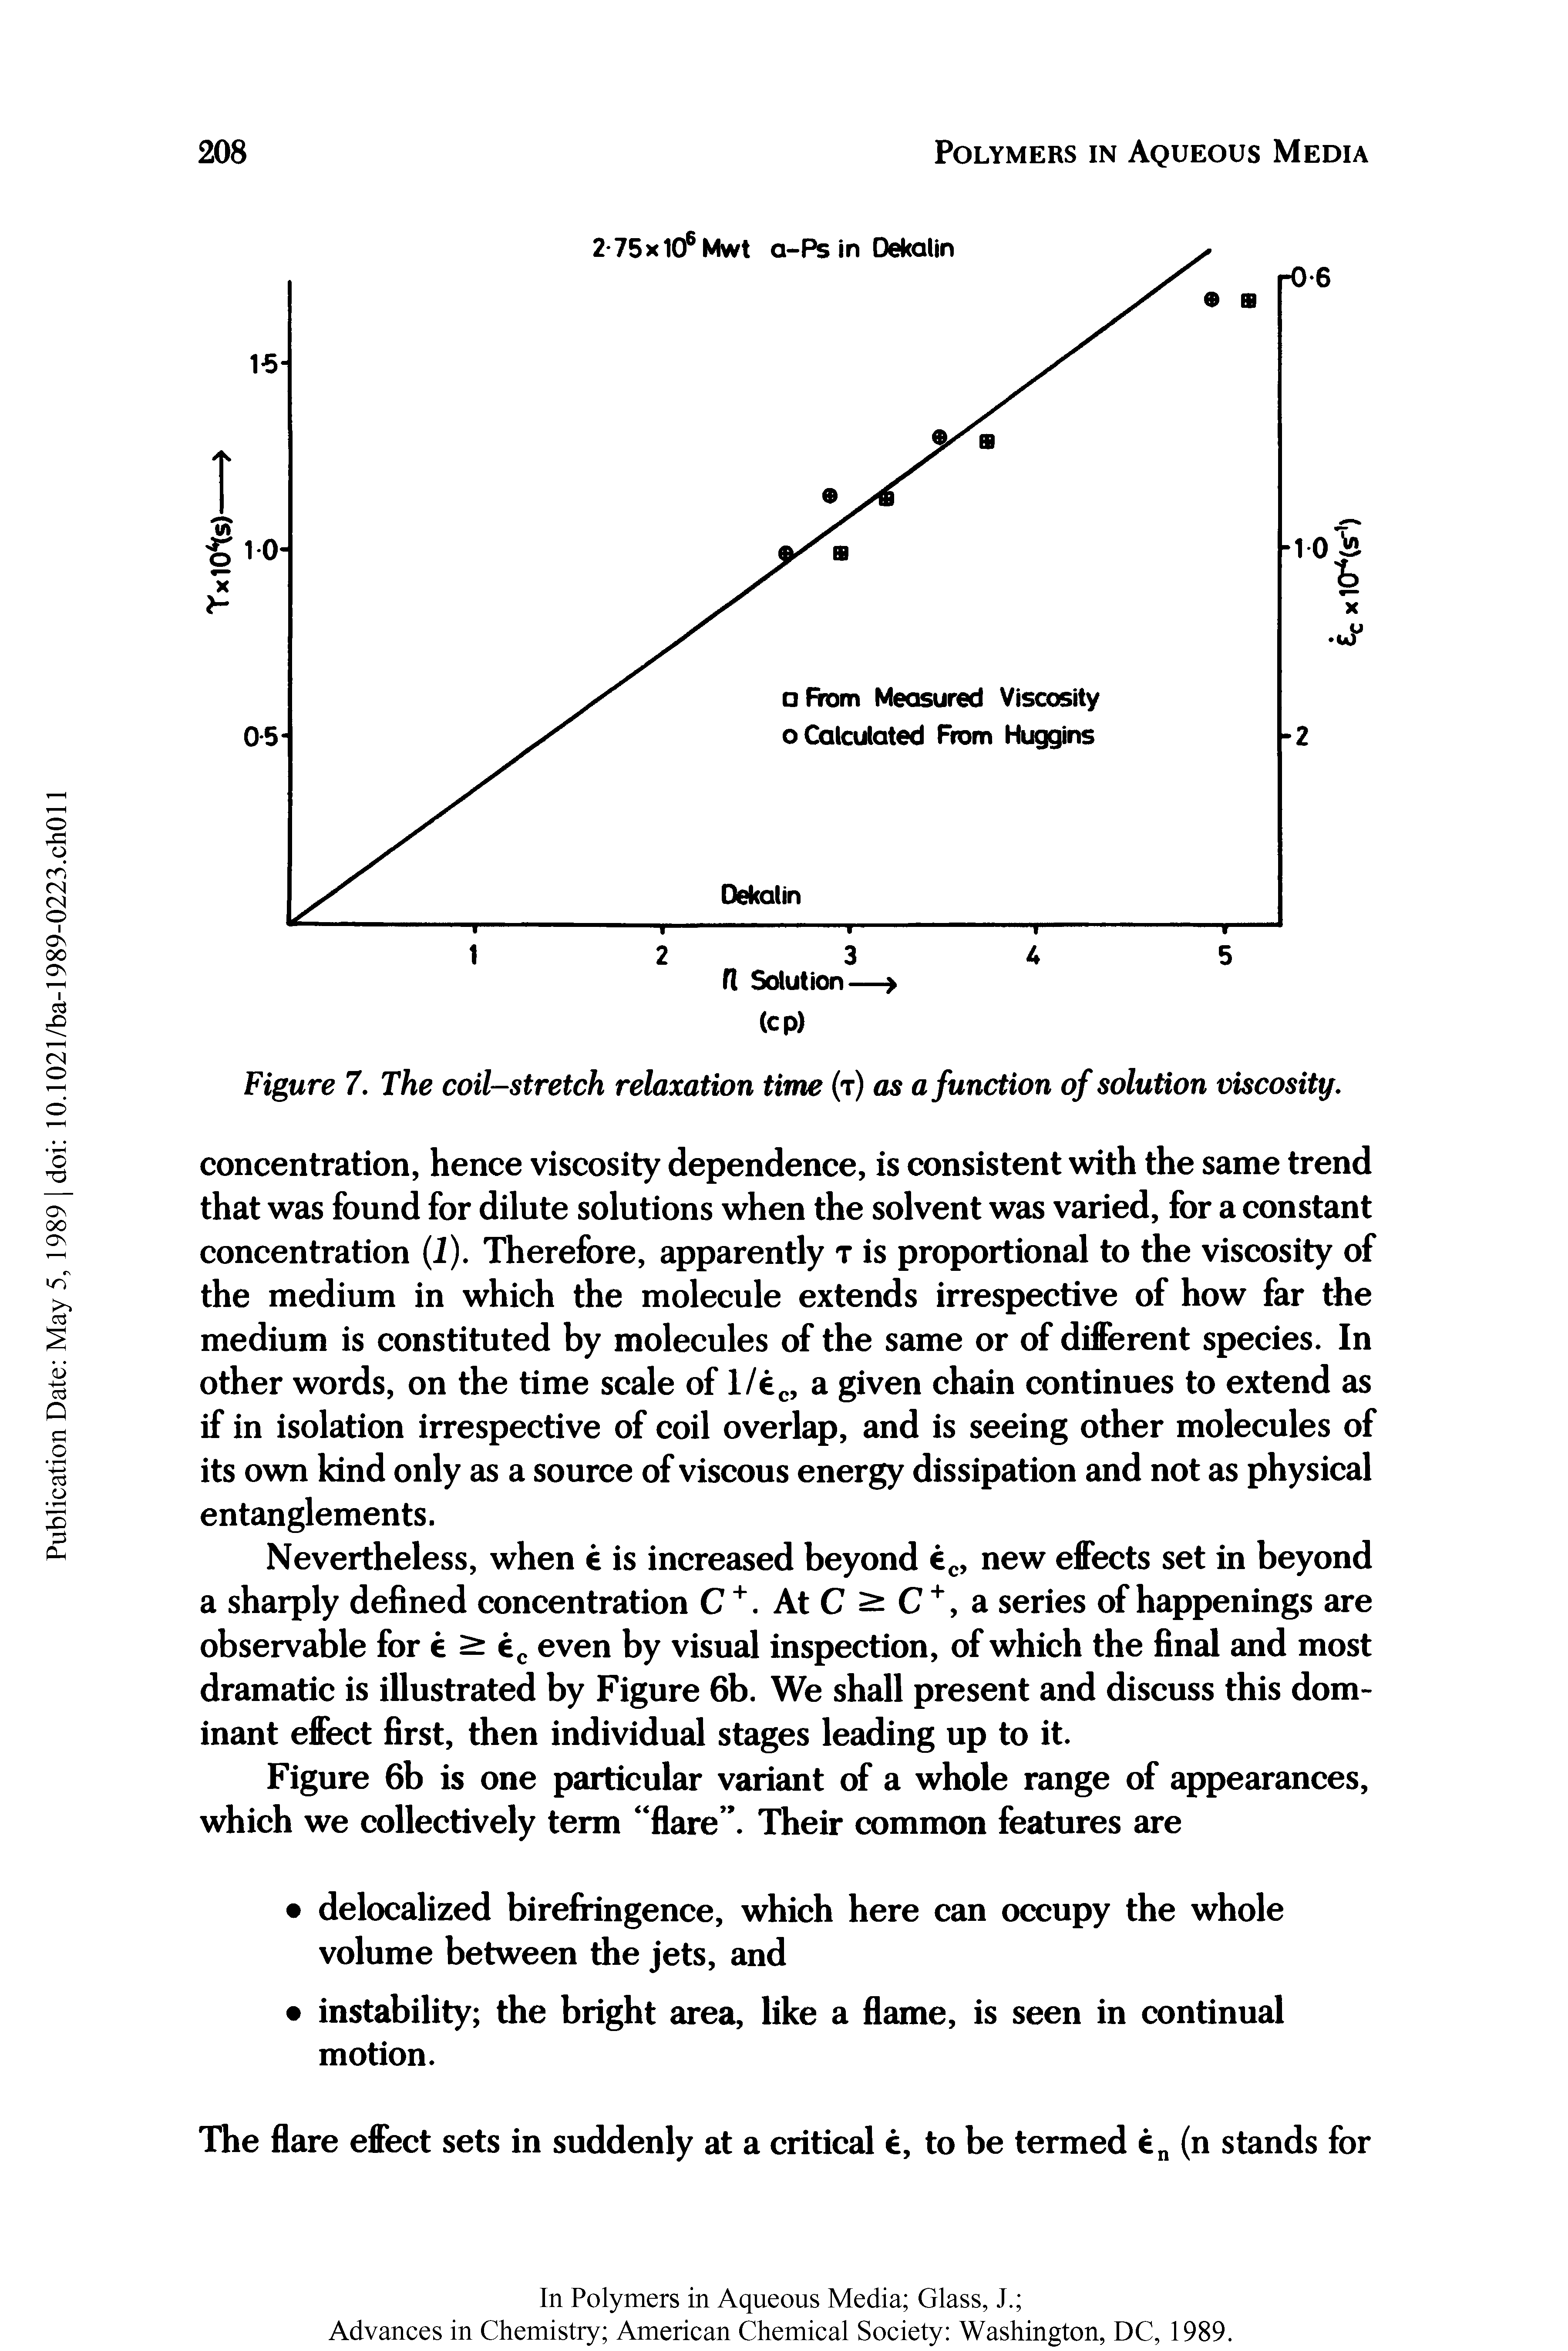 Figure 7. The coil-stretch relaxation time (t) as a function of solution viscosity.